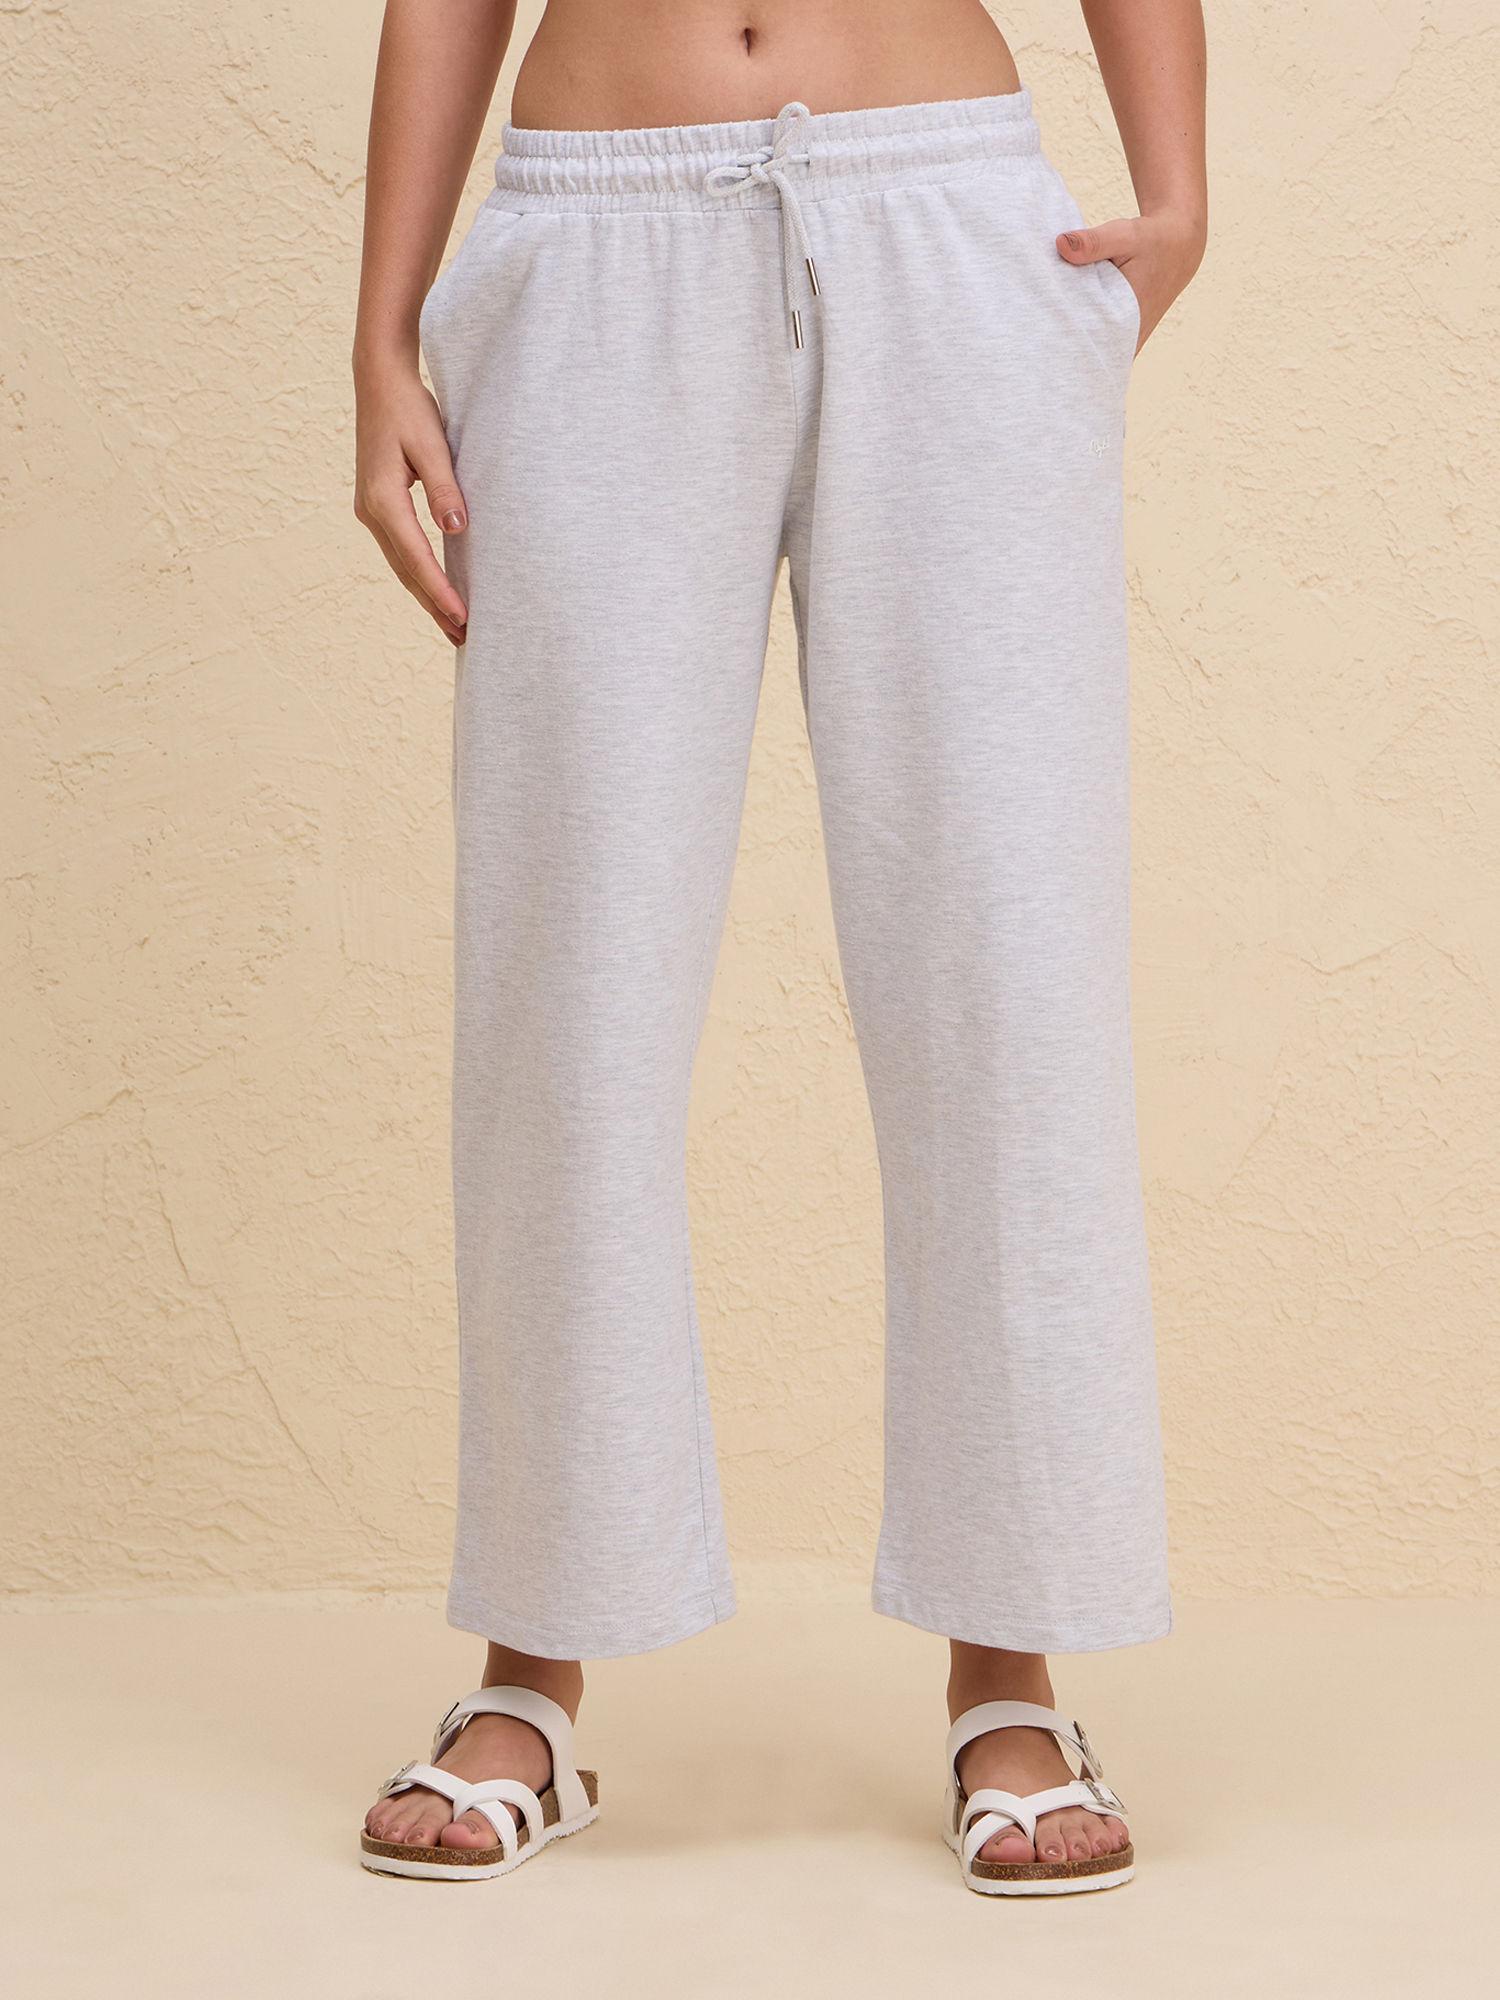 comfort cotton french terry straight leg lounge track pants-nyle606-grey melange